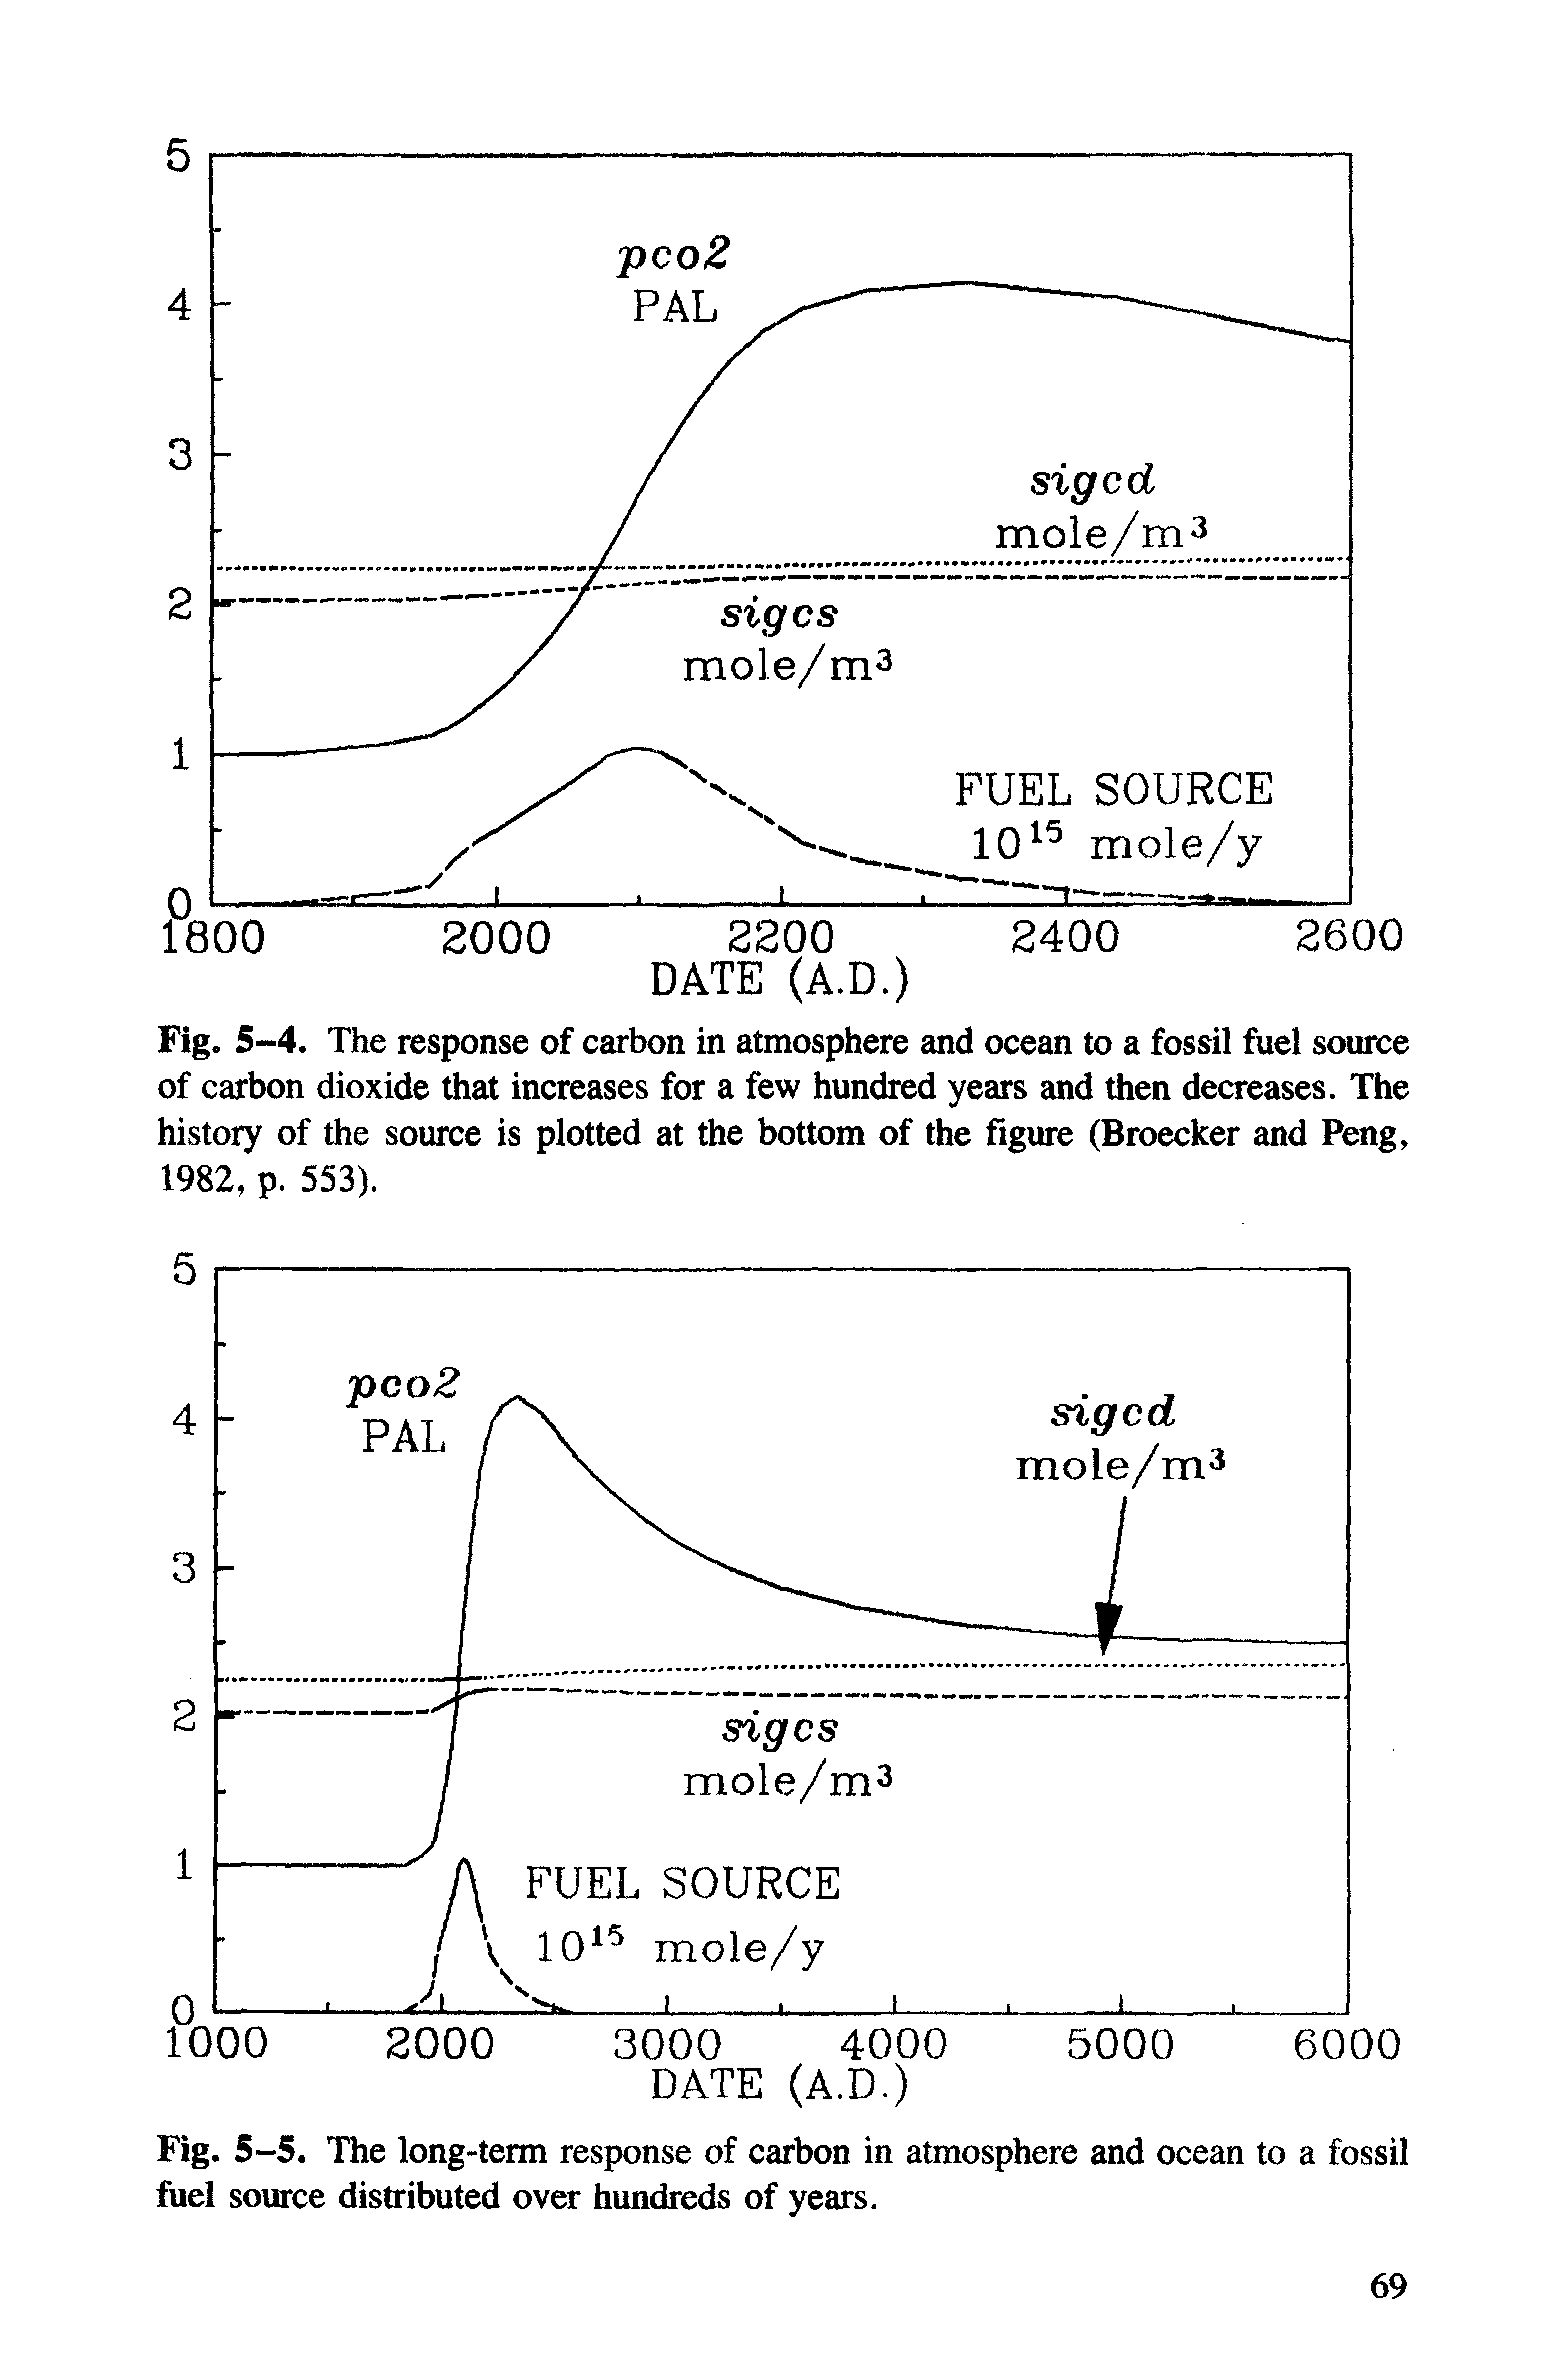 Fig. 5-5. The long-term response of carbon in atmosphere and ocean to a fossil fuel source distributed over hundreds of years.